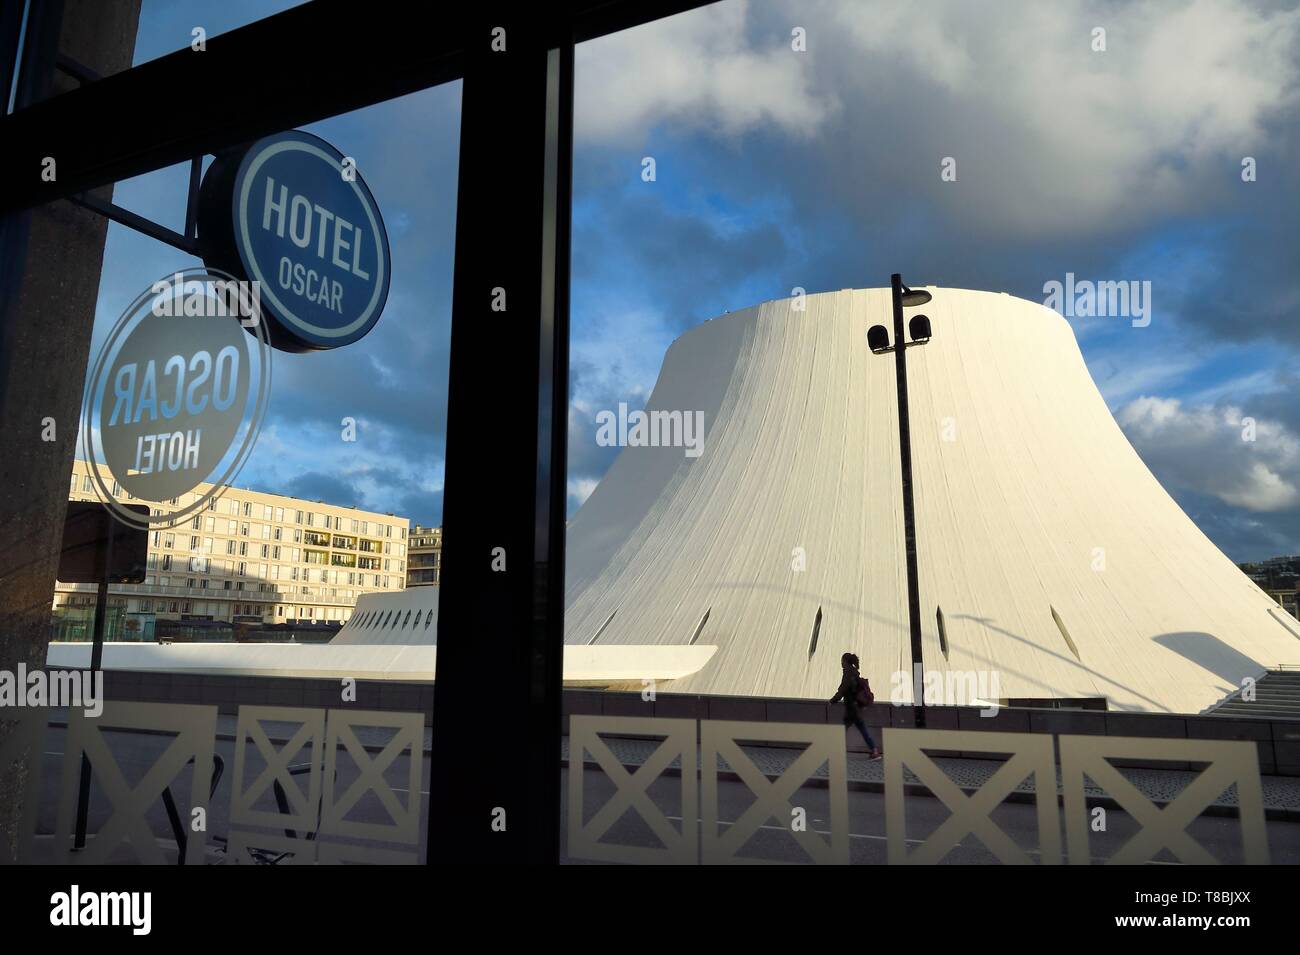 France, Seine Maritime, Le Havre, Downtown rebuilt by Auguste Perret listed as World Heritage by UNESCO, the cultural center called Volcano created by Oscar Niemeyer seen from Oscar Hotel Stock Photo